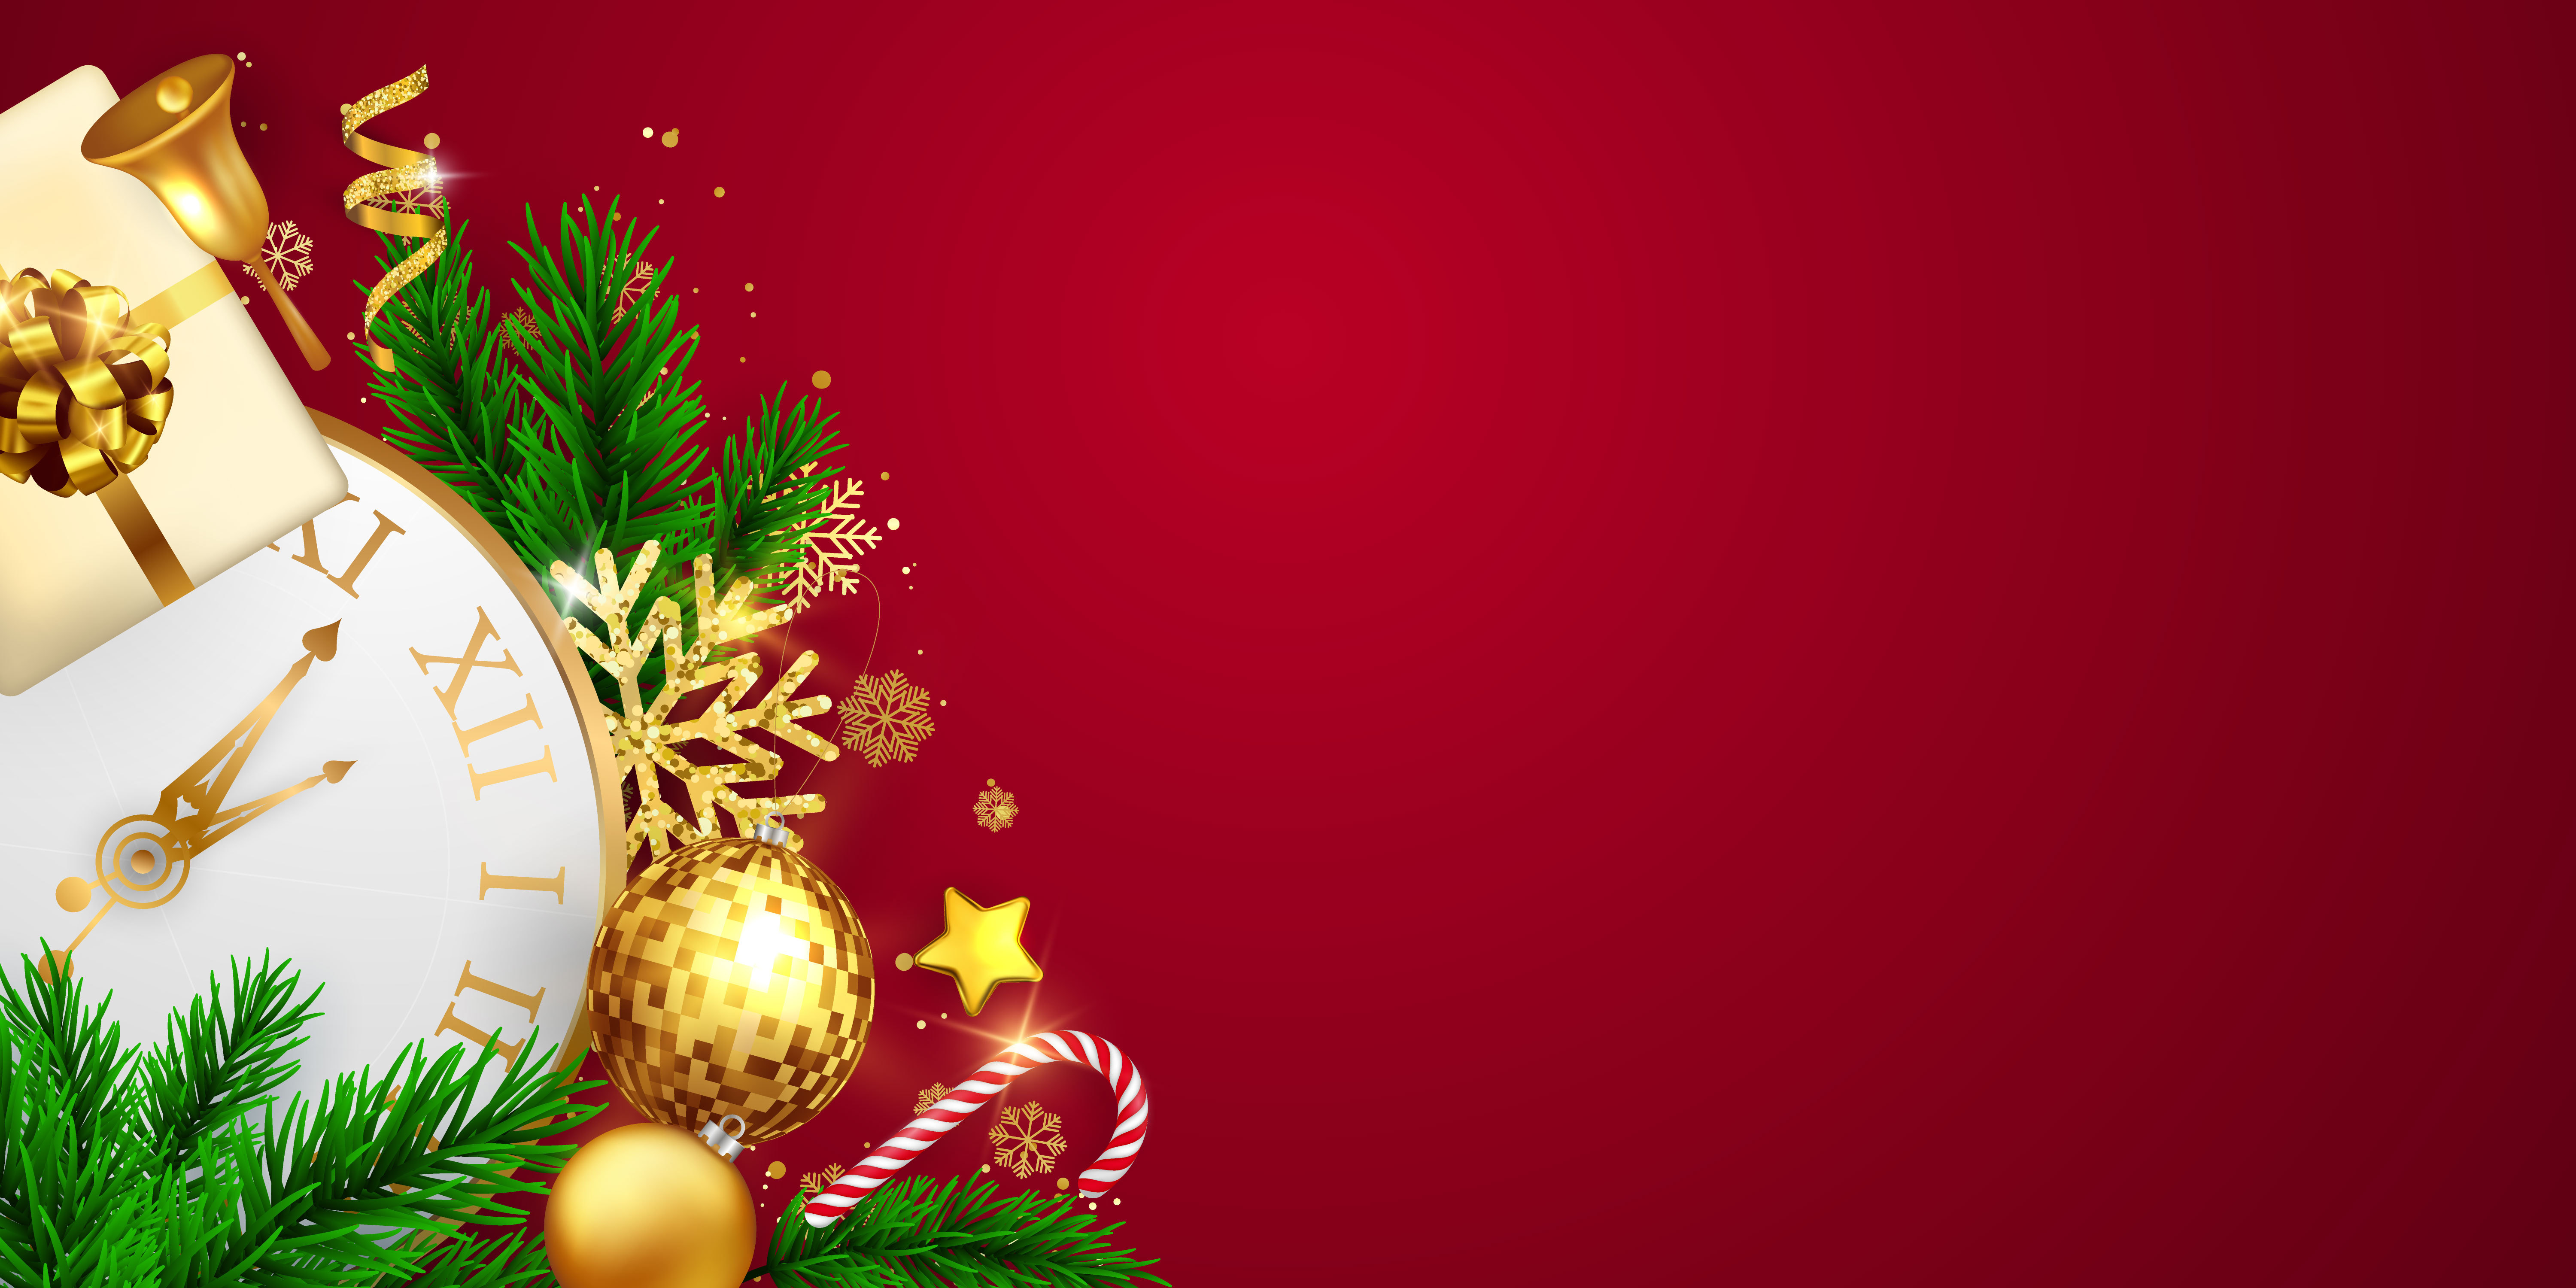 Merry Christmas and Happy New Year background. Celebration background template with ribbons. luxury greeting rich card.